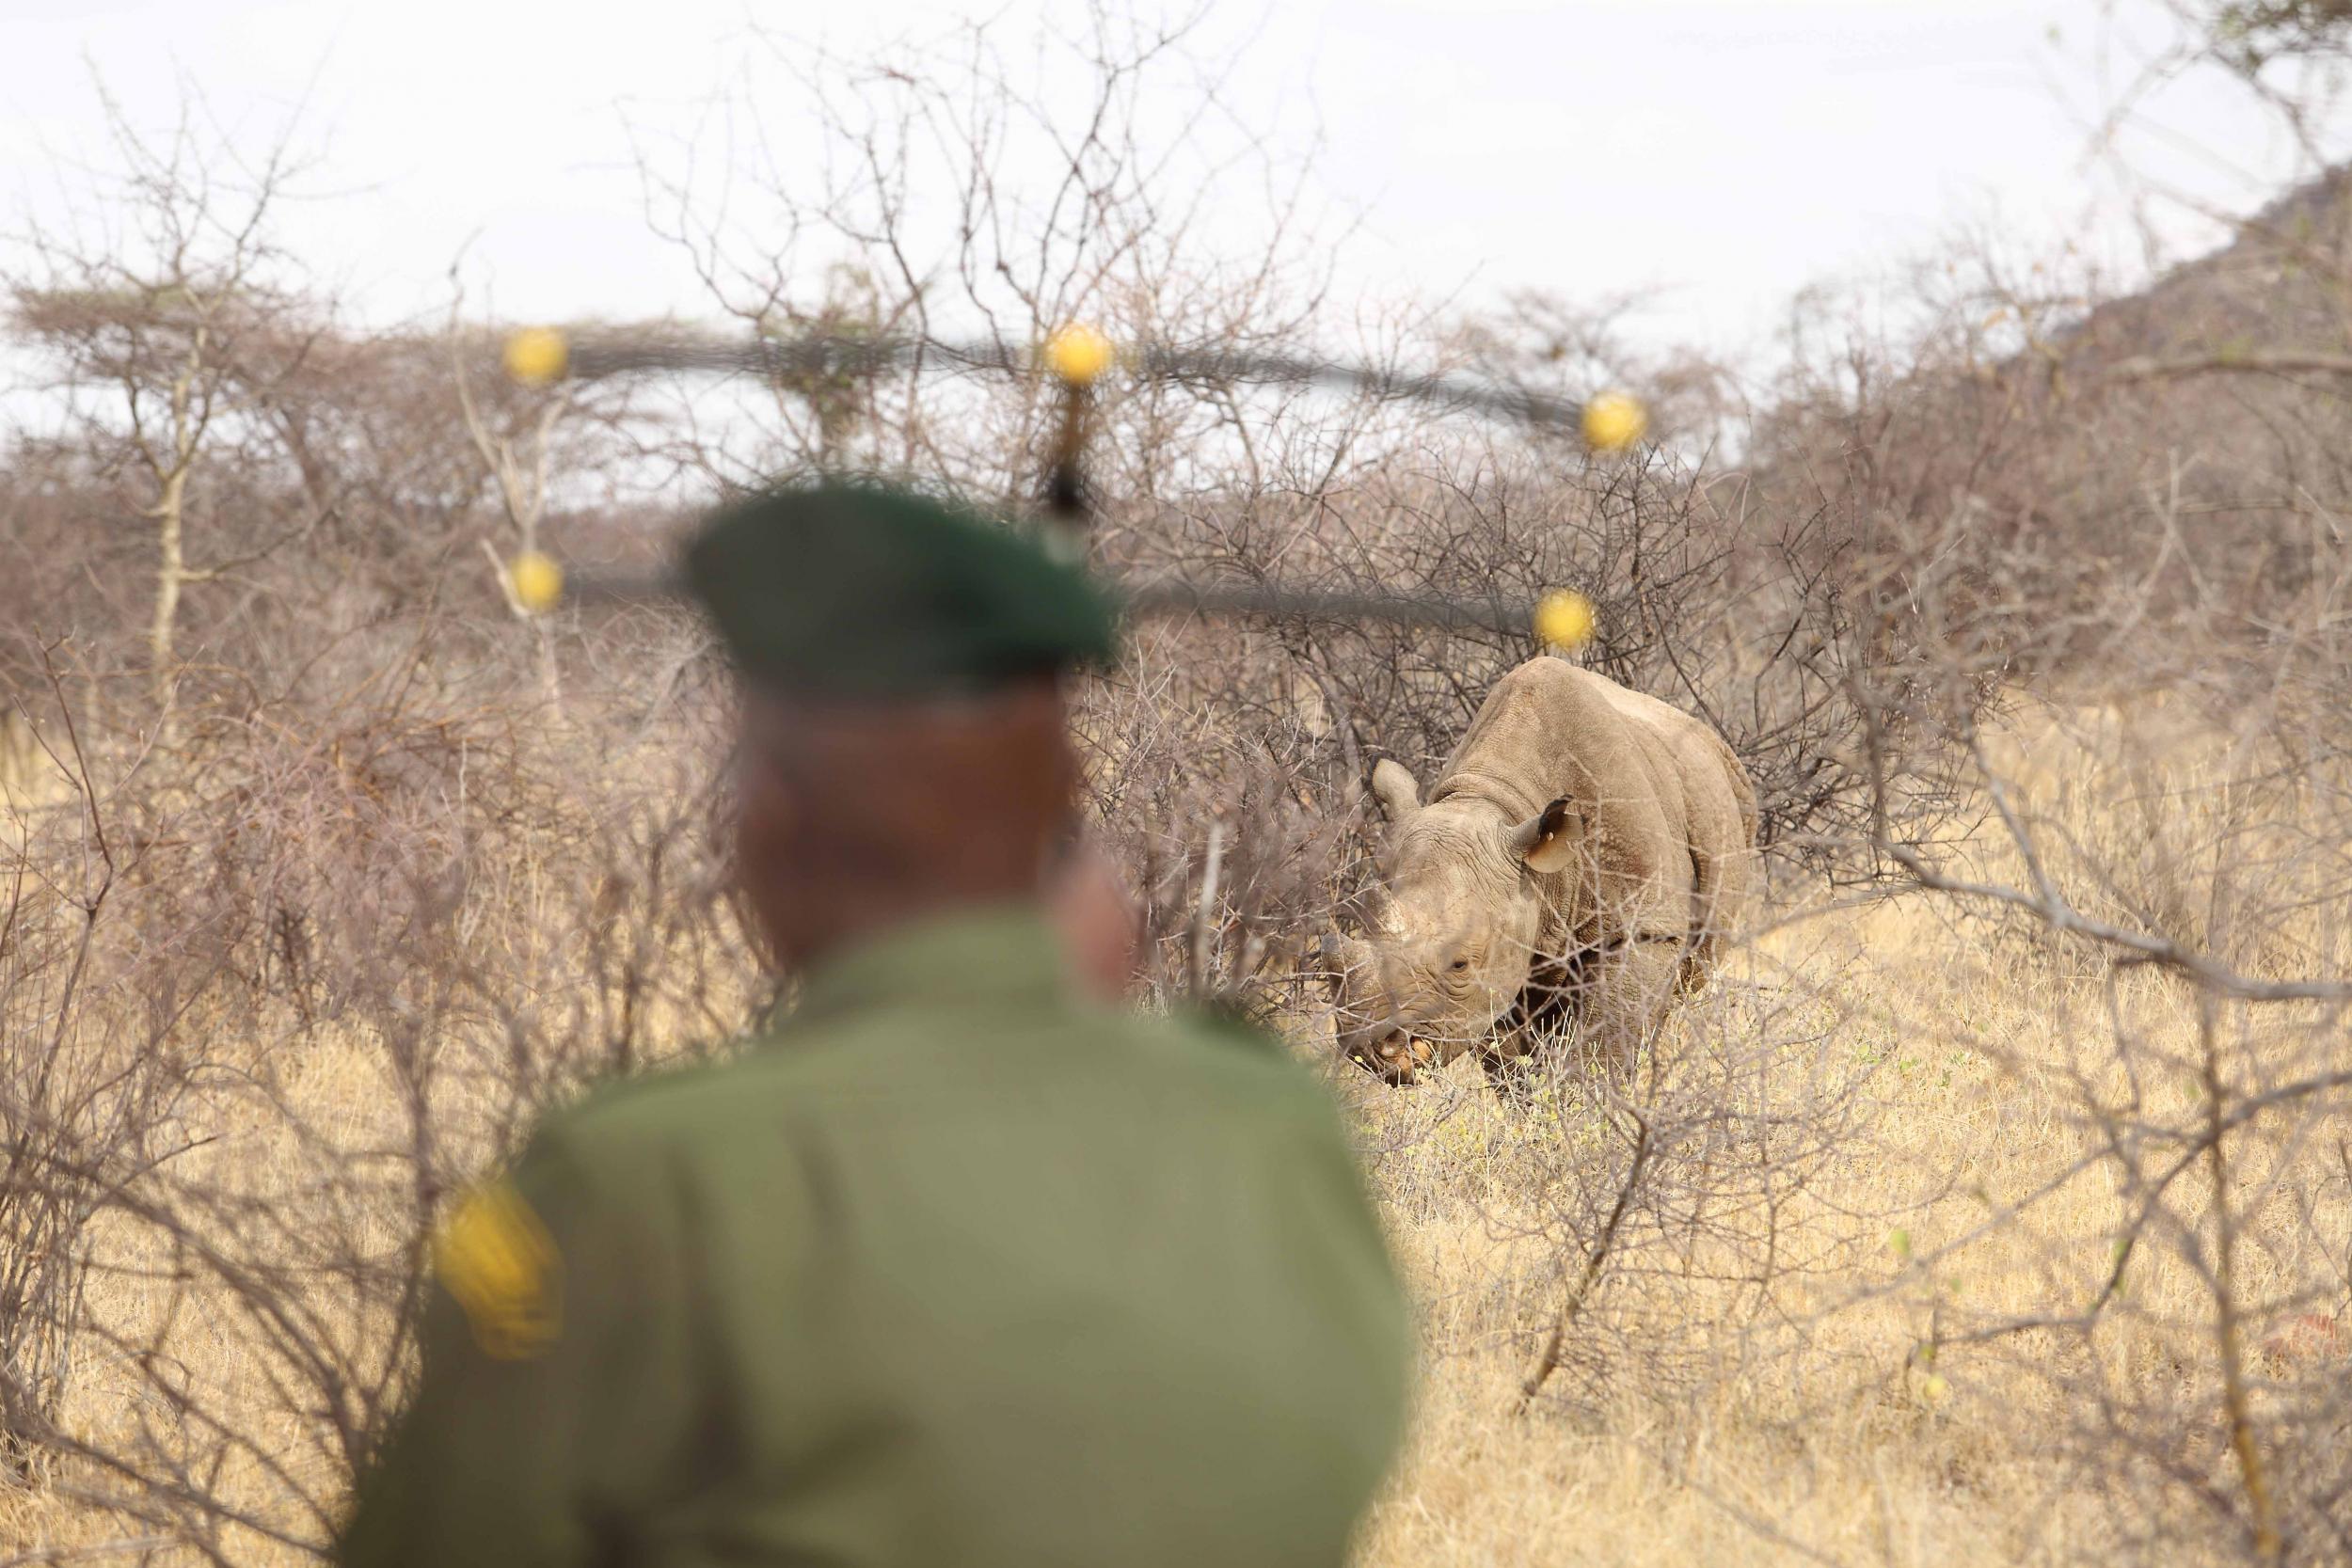 The rhino trackers are equipped with GPS